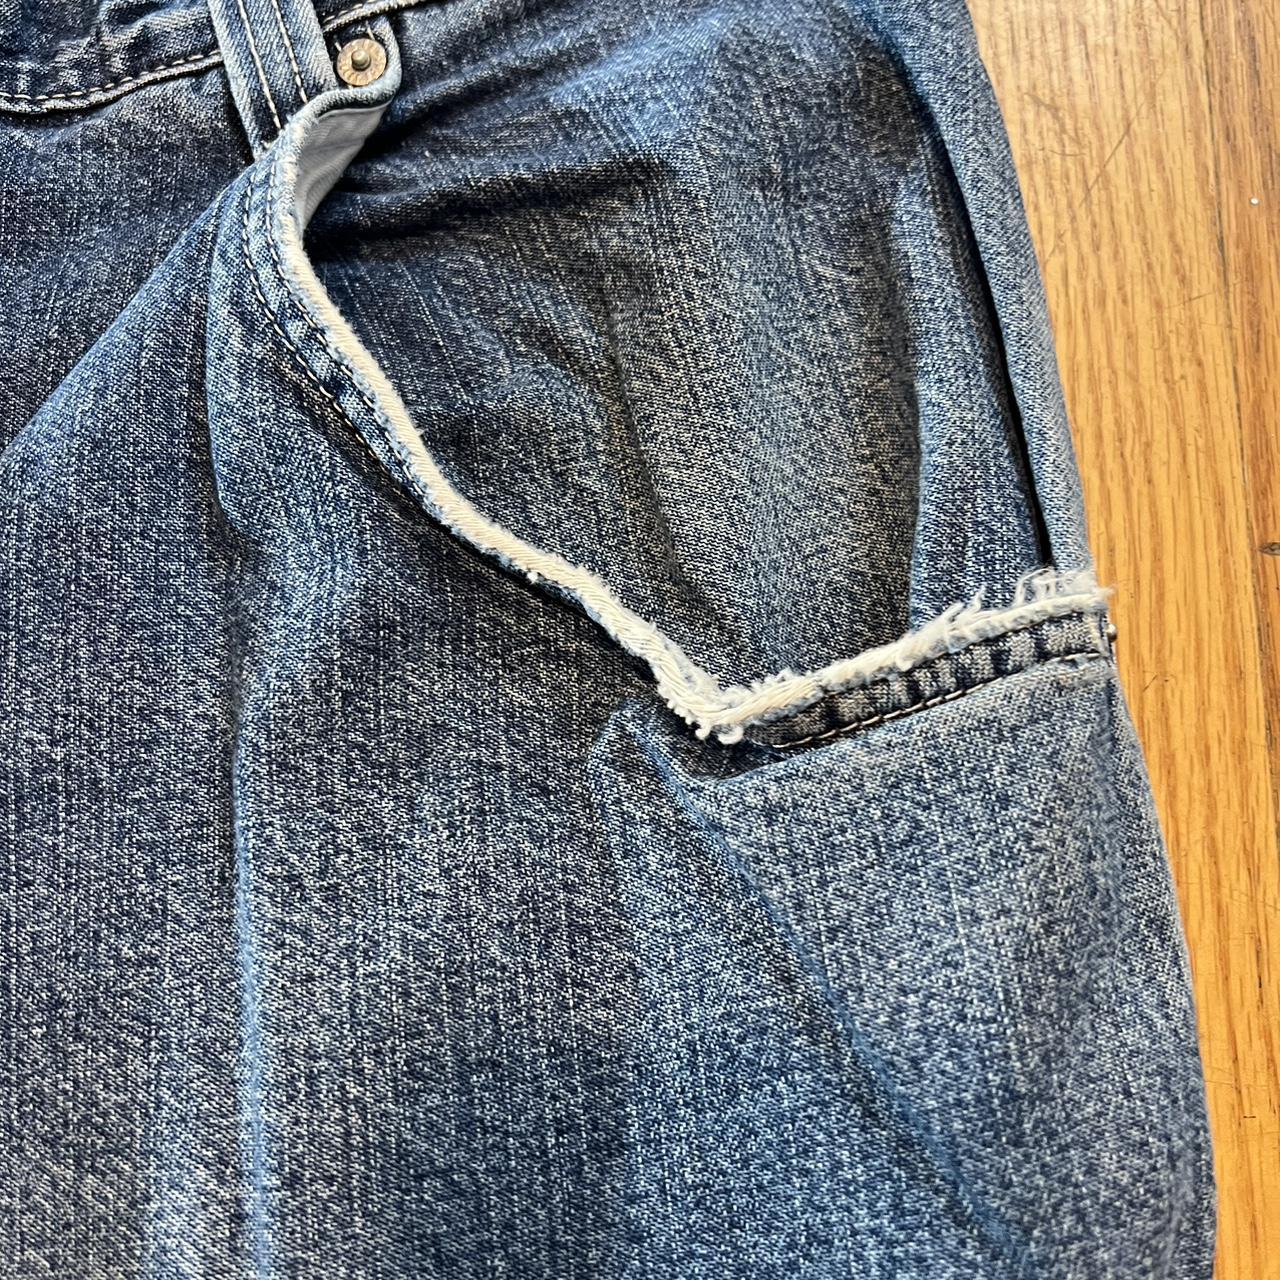 Insane Y2K Jnco Jeans ‼️Do not buy looking for... - Depop